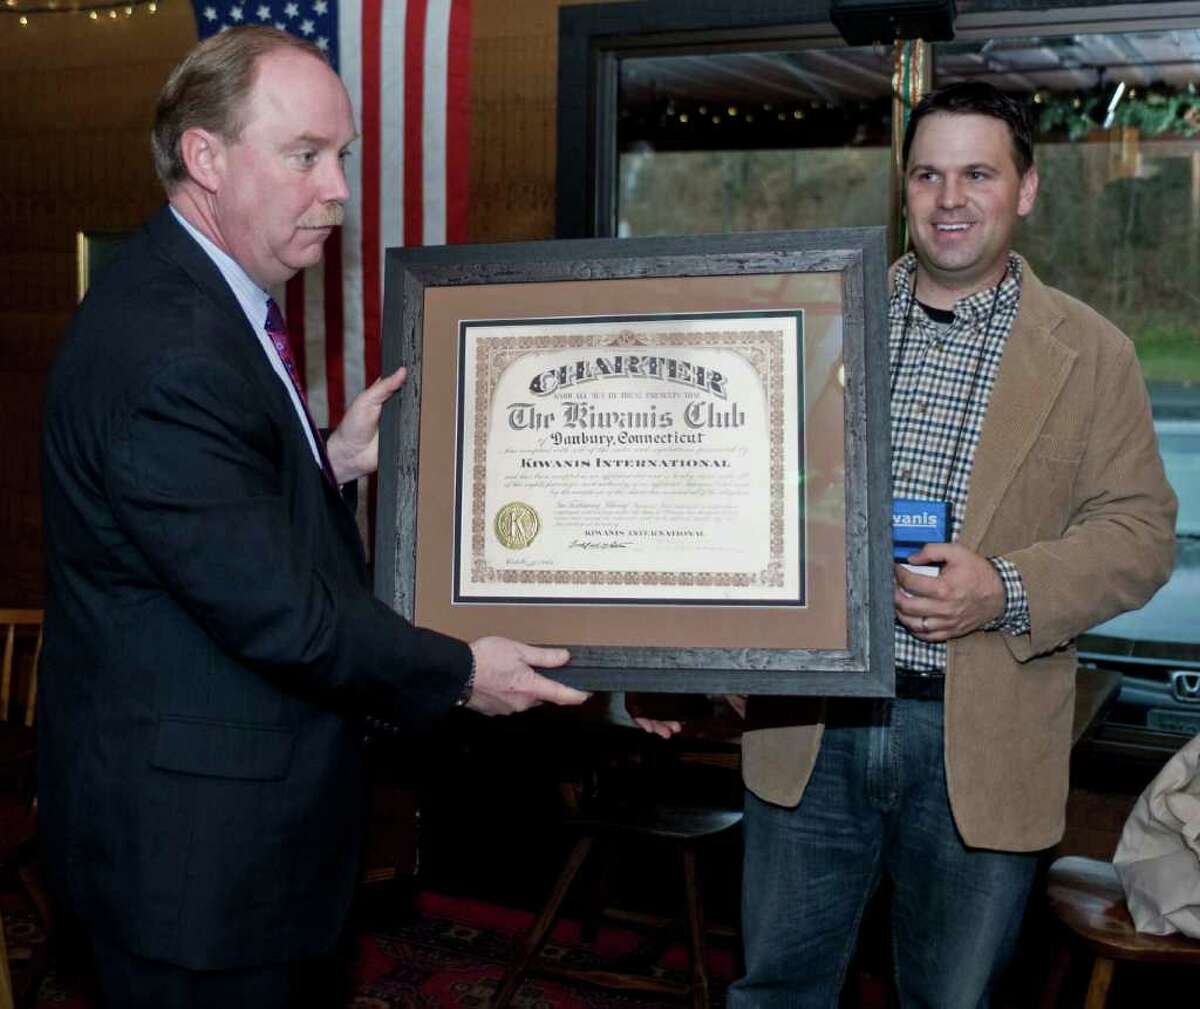 State Sen. Michael McLachlan and Kiwanis President Paul S. Caso with the original Kiwanis charter from Oct. 15, 1942. State Senator McLachlan presented it to club members following their weekly Tuesday luncheon at Chuck's Steak House. Tuesday, Nov. 30, 2010